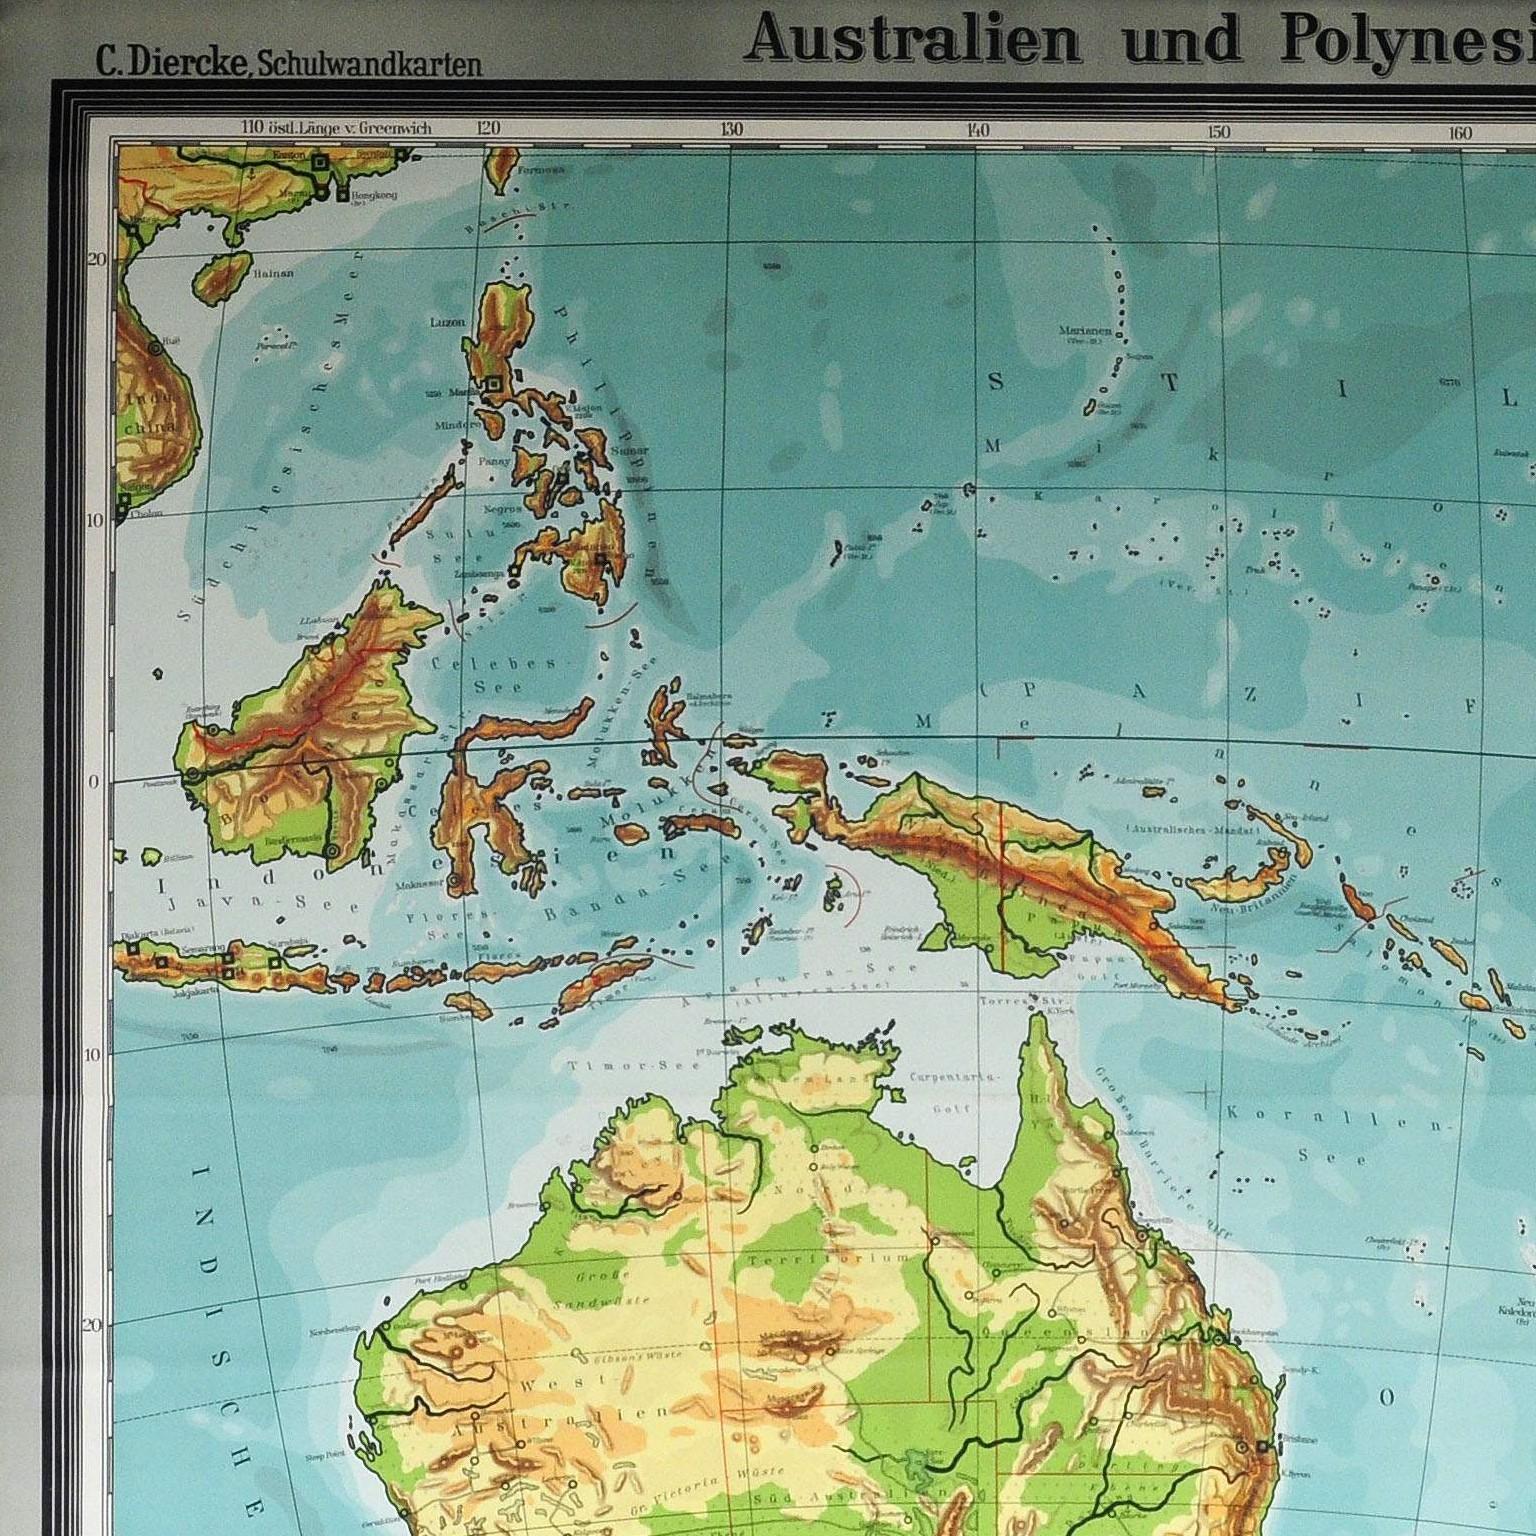 Map Mural Rollable Poster Vintage Wall Chart Australia New Zealand Polynesia

A beautiful vintage school map illustrating the popular region of Australia and Polynesia. Used as teaching material in German schools around the 1970th. Colorful print on